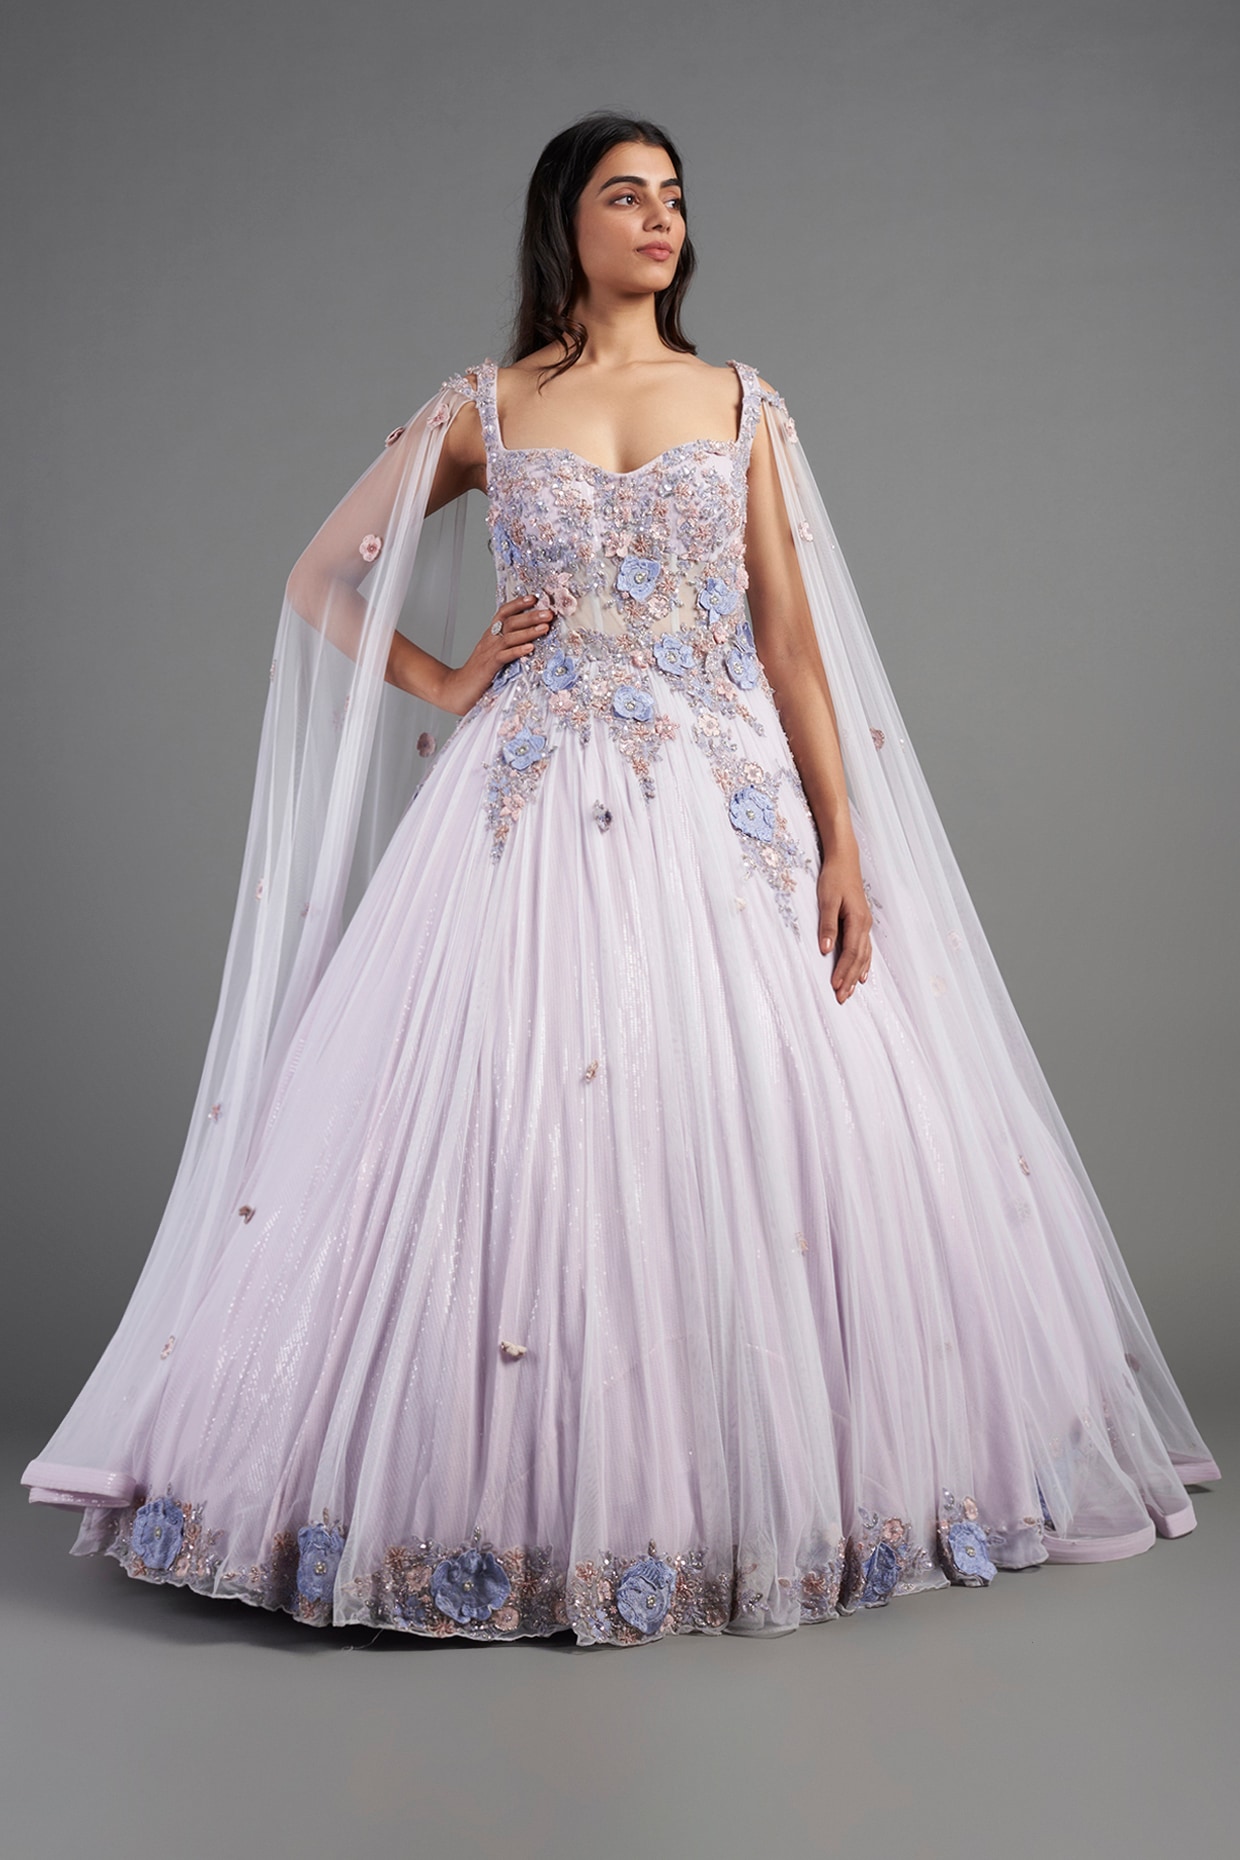 Buy Ball Gowns Right Now! - The Dress Outlet